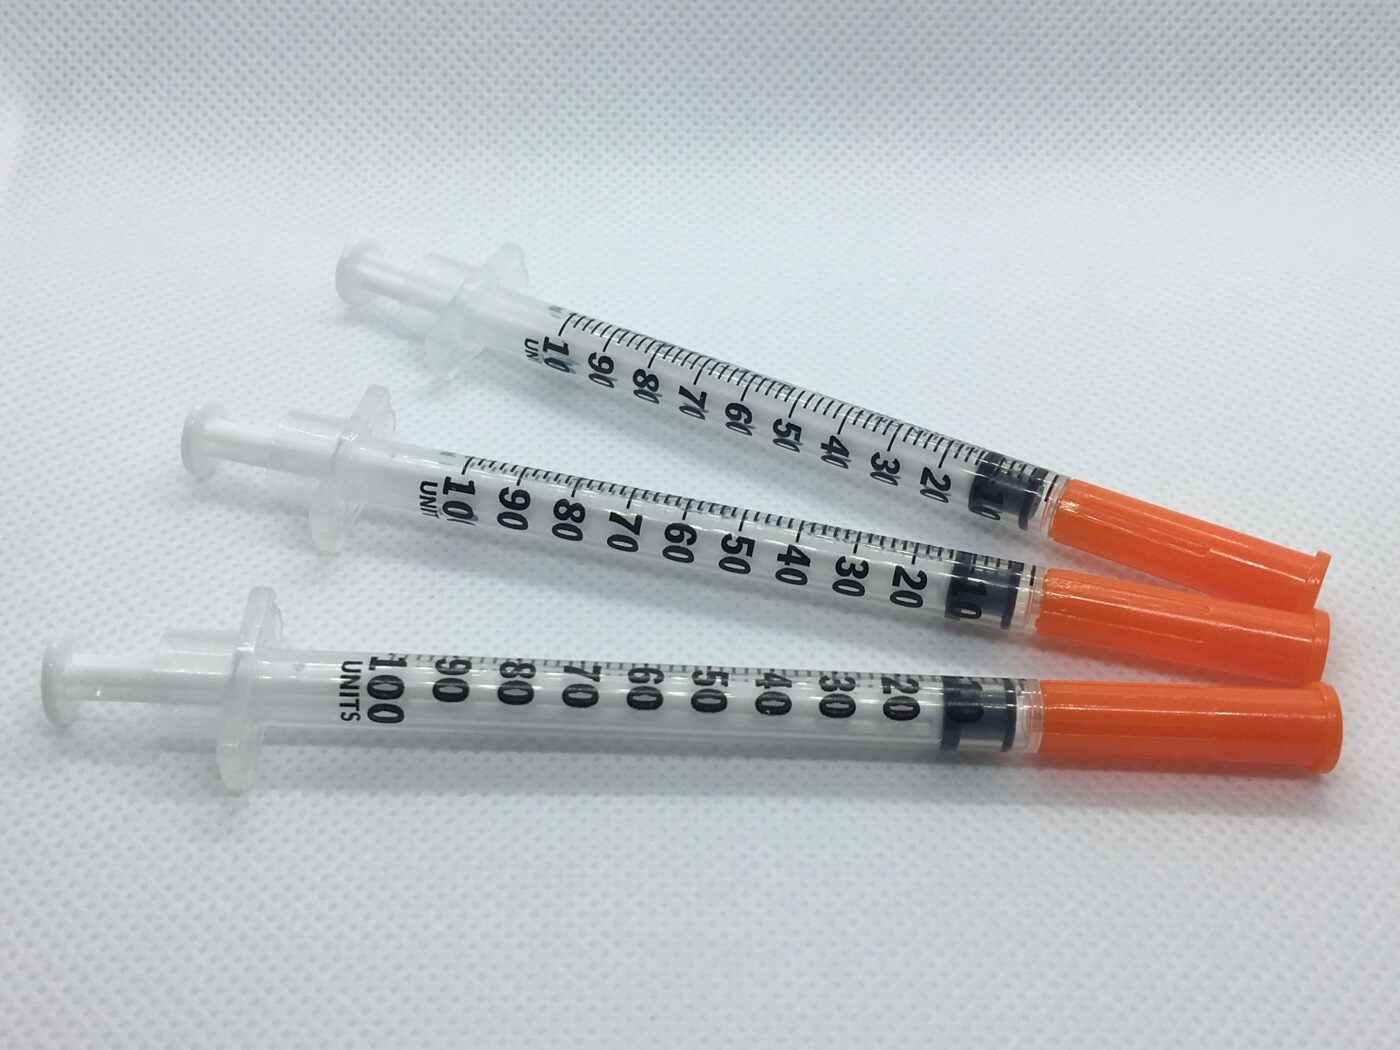 Know Everything About The Insulin Storage And Safety Needle